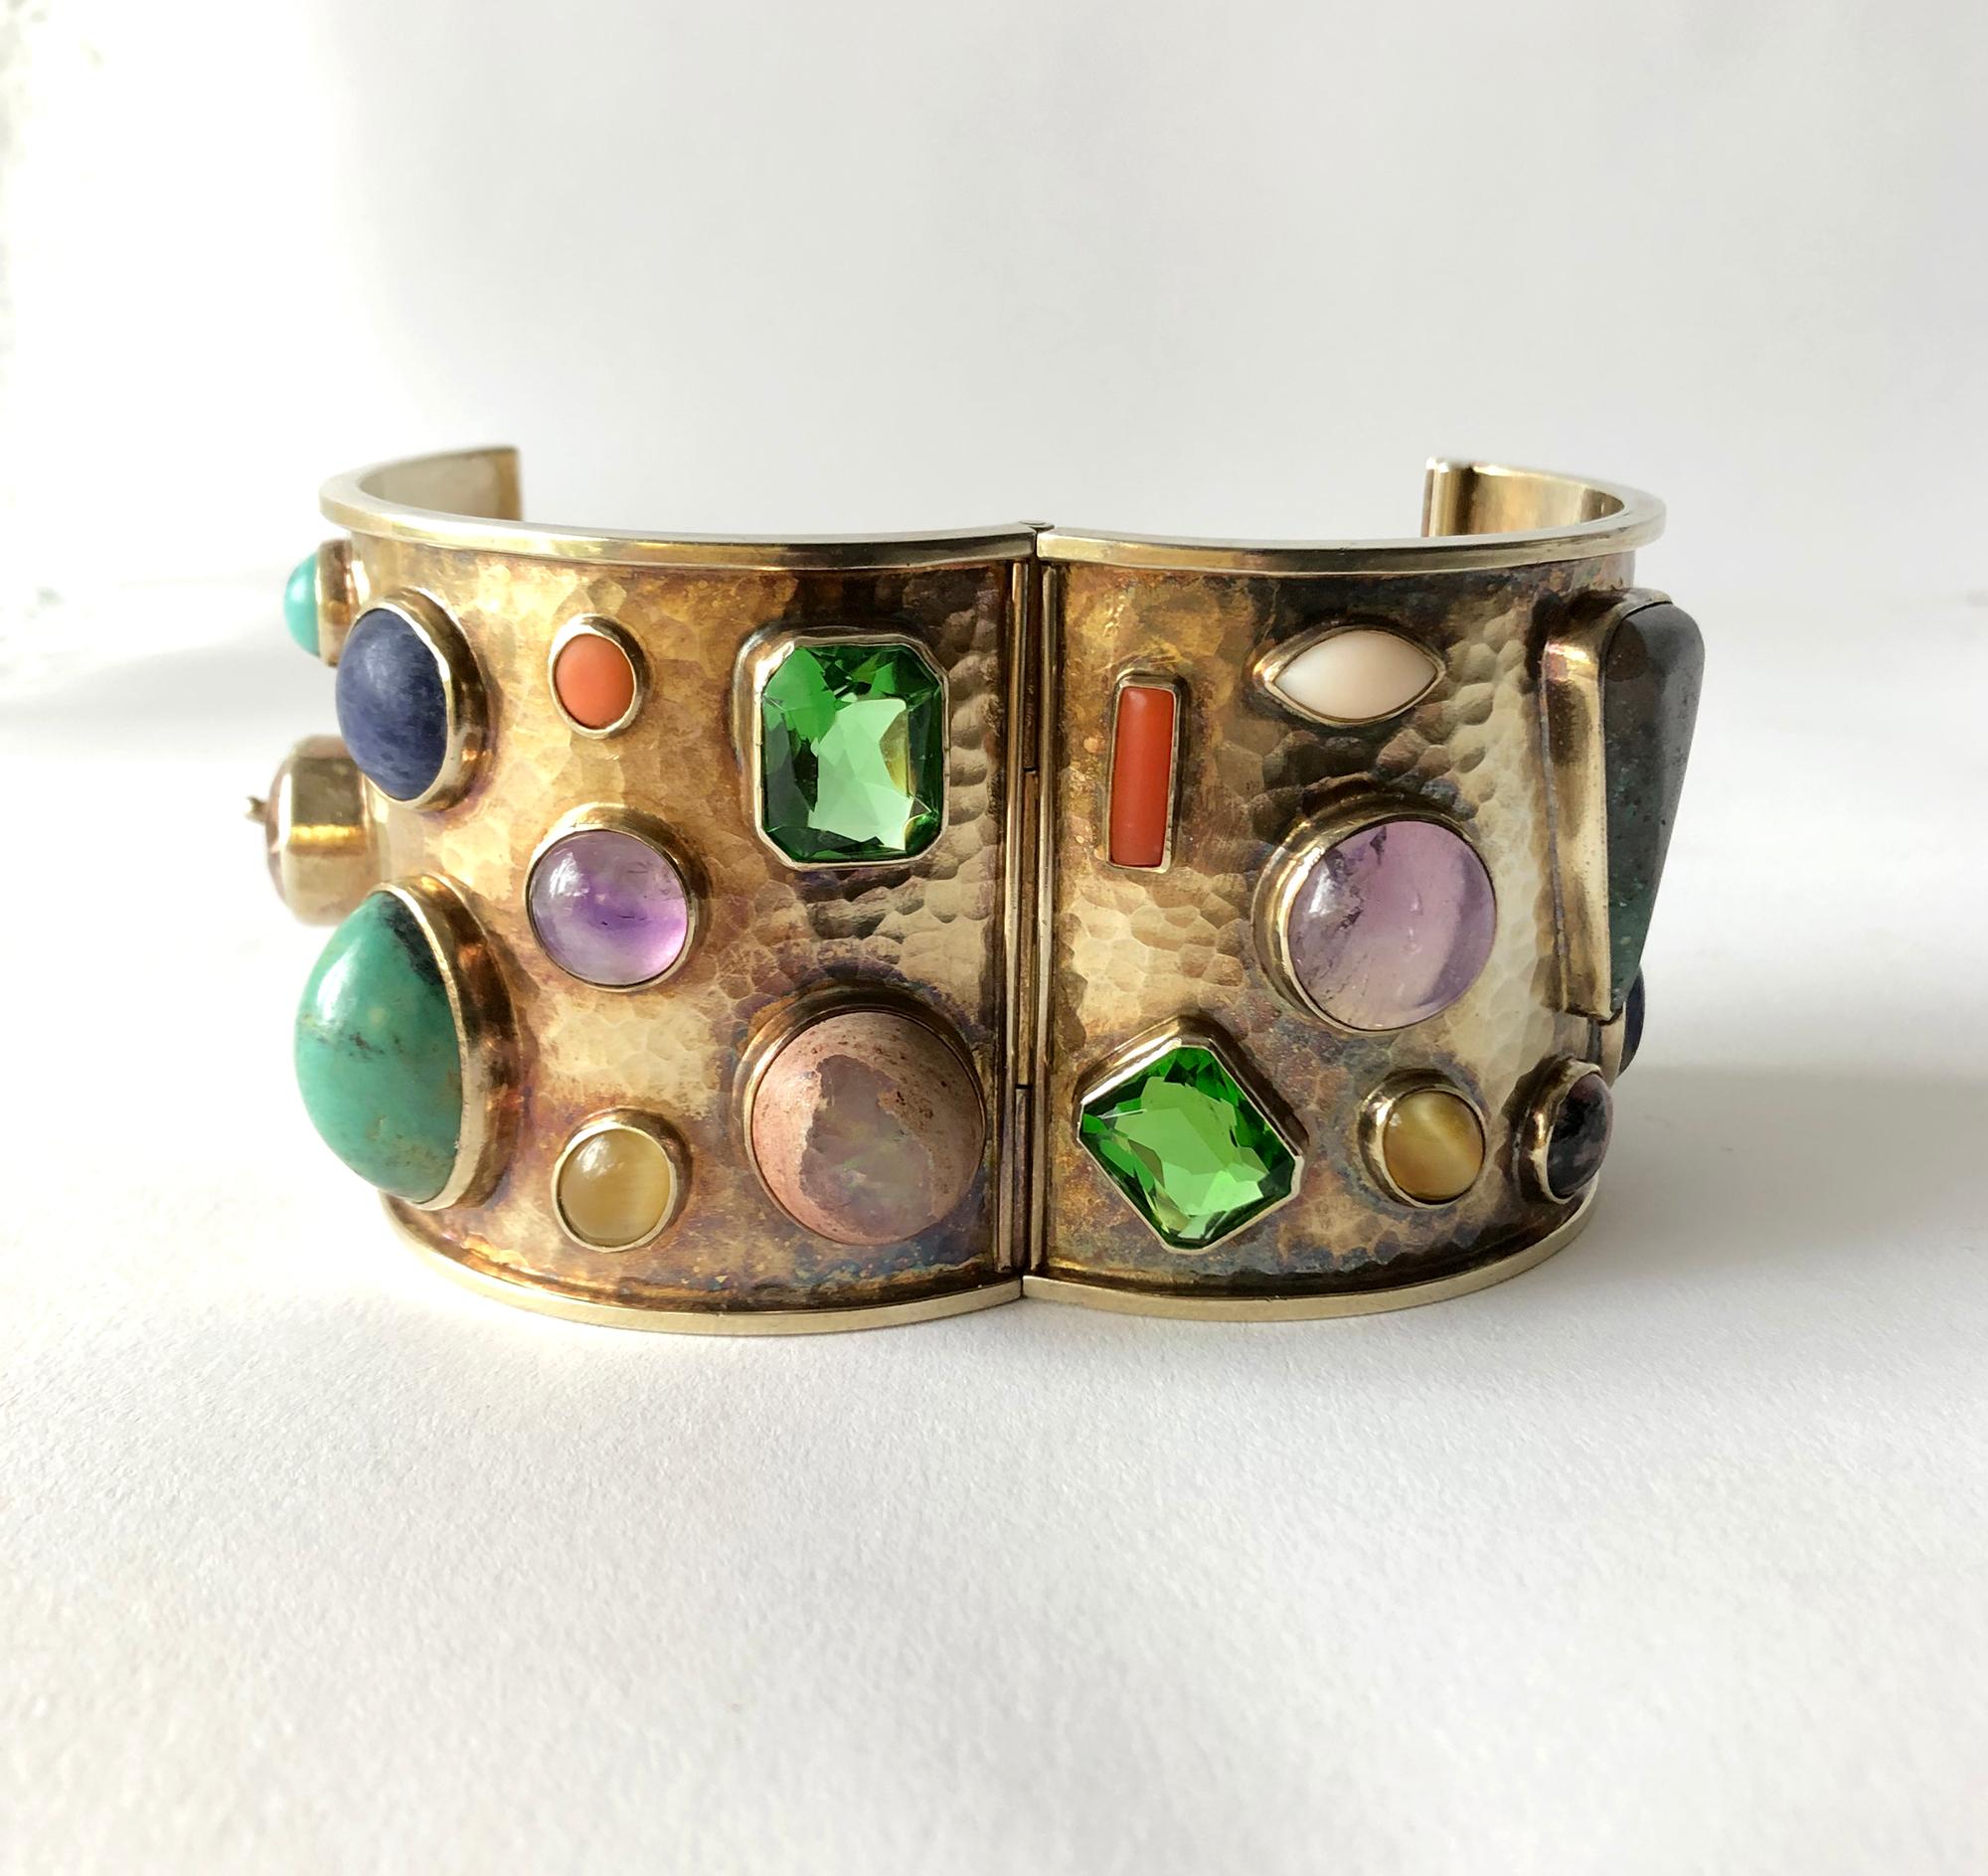 sterling silver cuff bracelet with stones